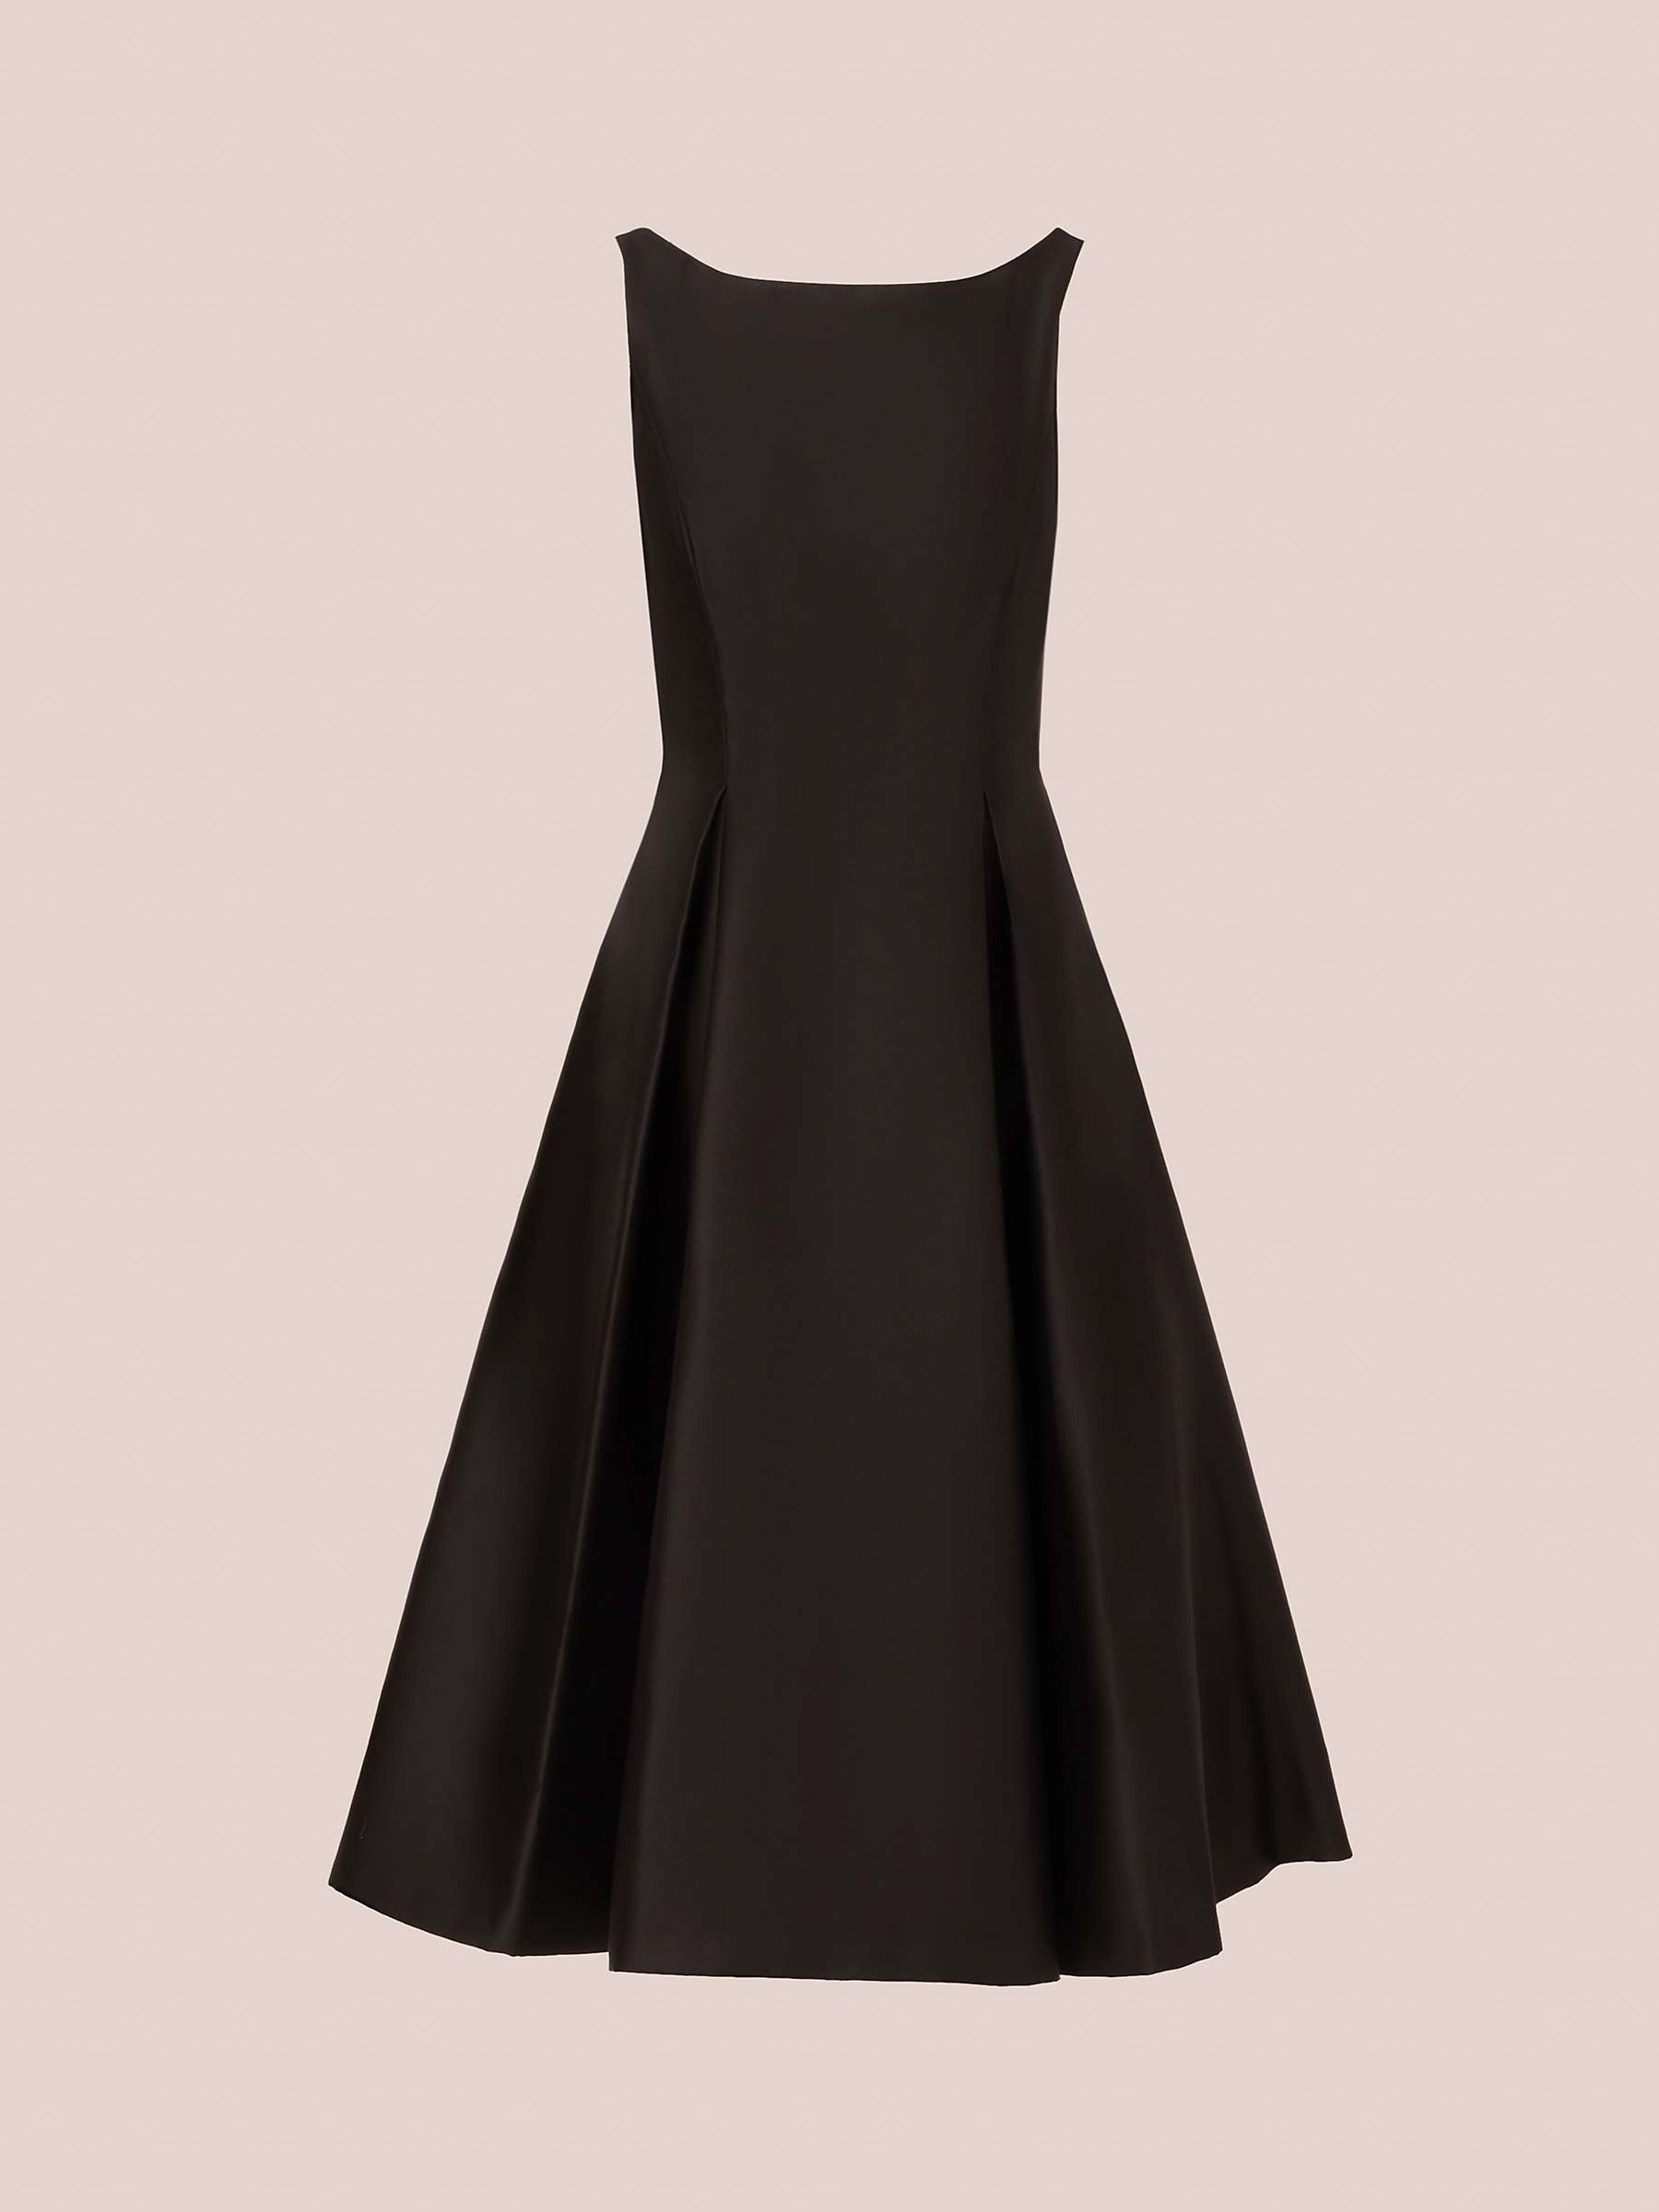 Buy Adrianna Papell Sleeveless Cocktail Dress, Black Online at johnlewis.com